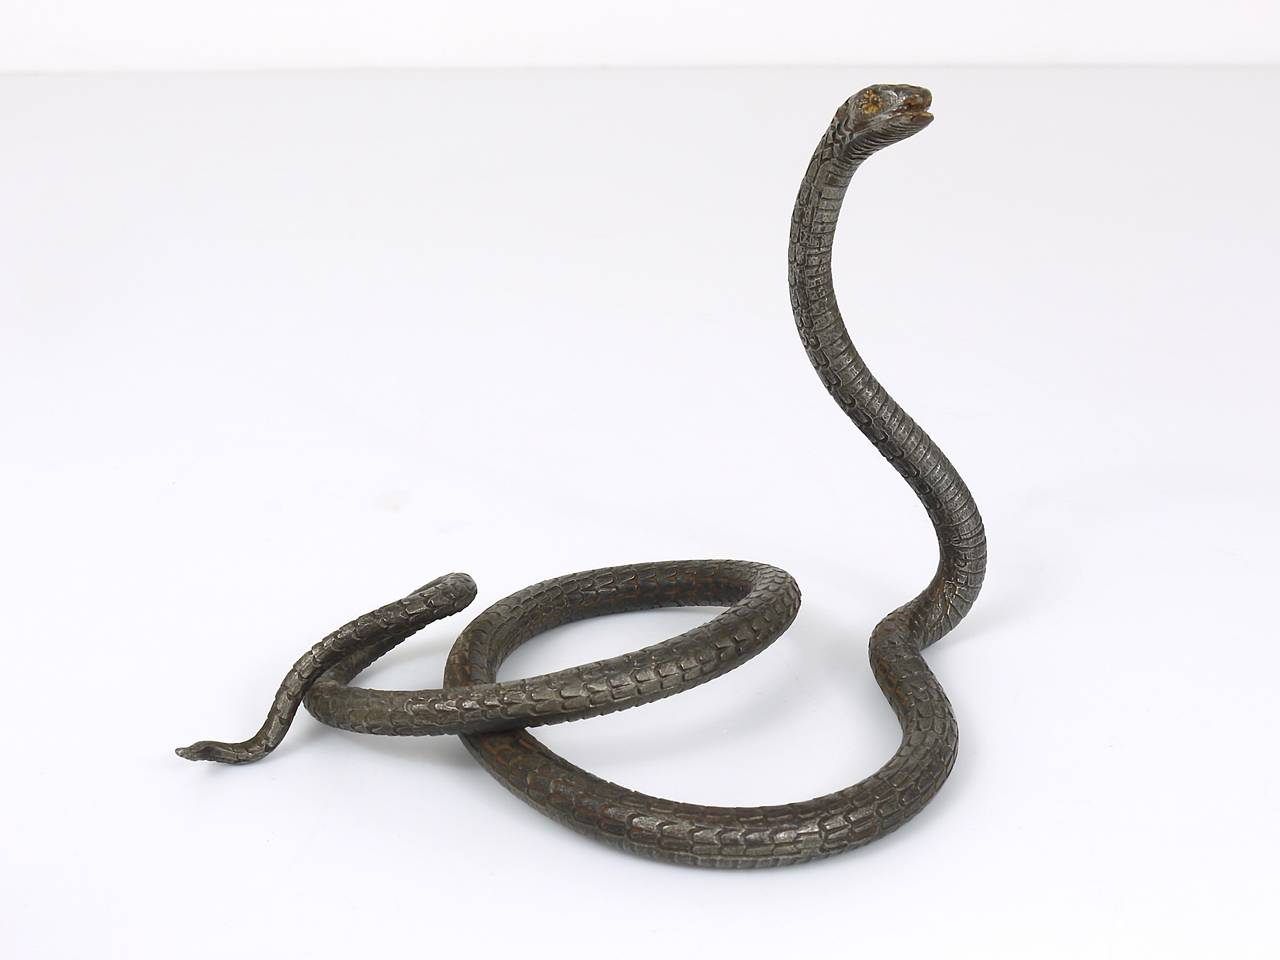 Early 20th Century A Hand-Forged Iron Model Of A Snake, Snake Sculpture, Vienna, 1920s